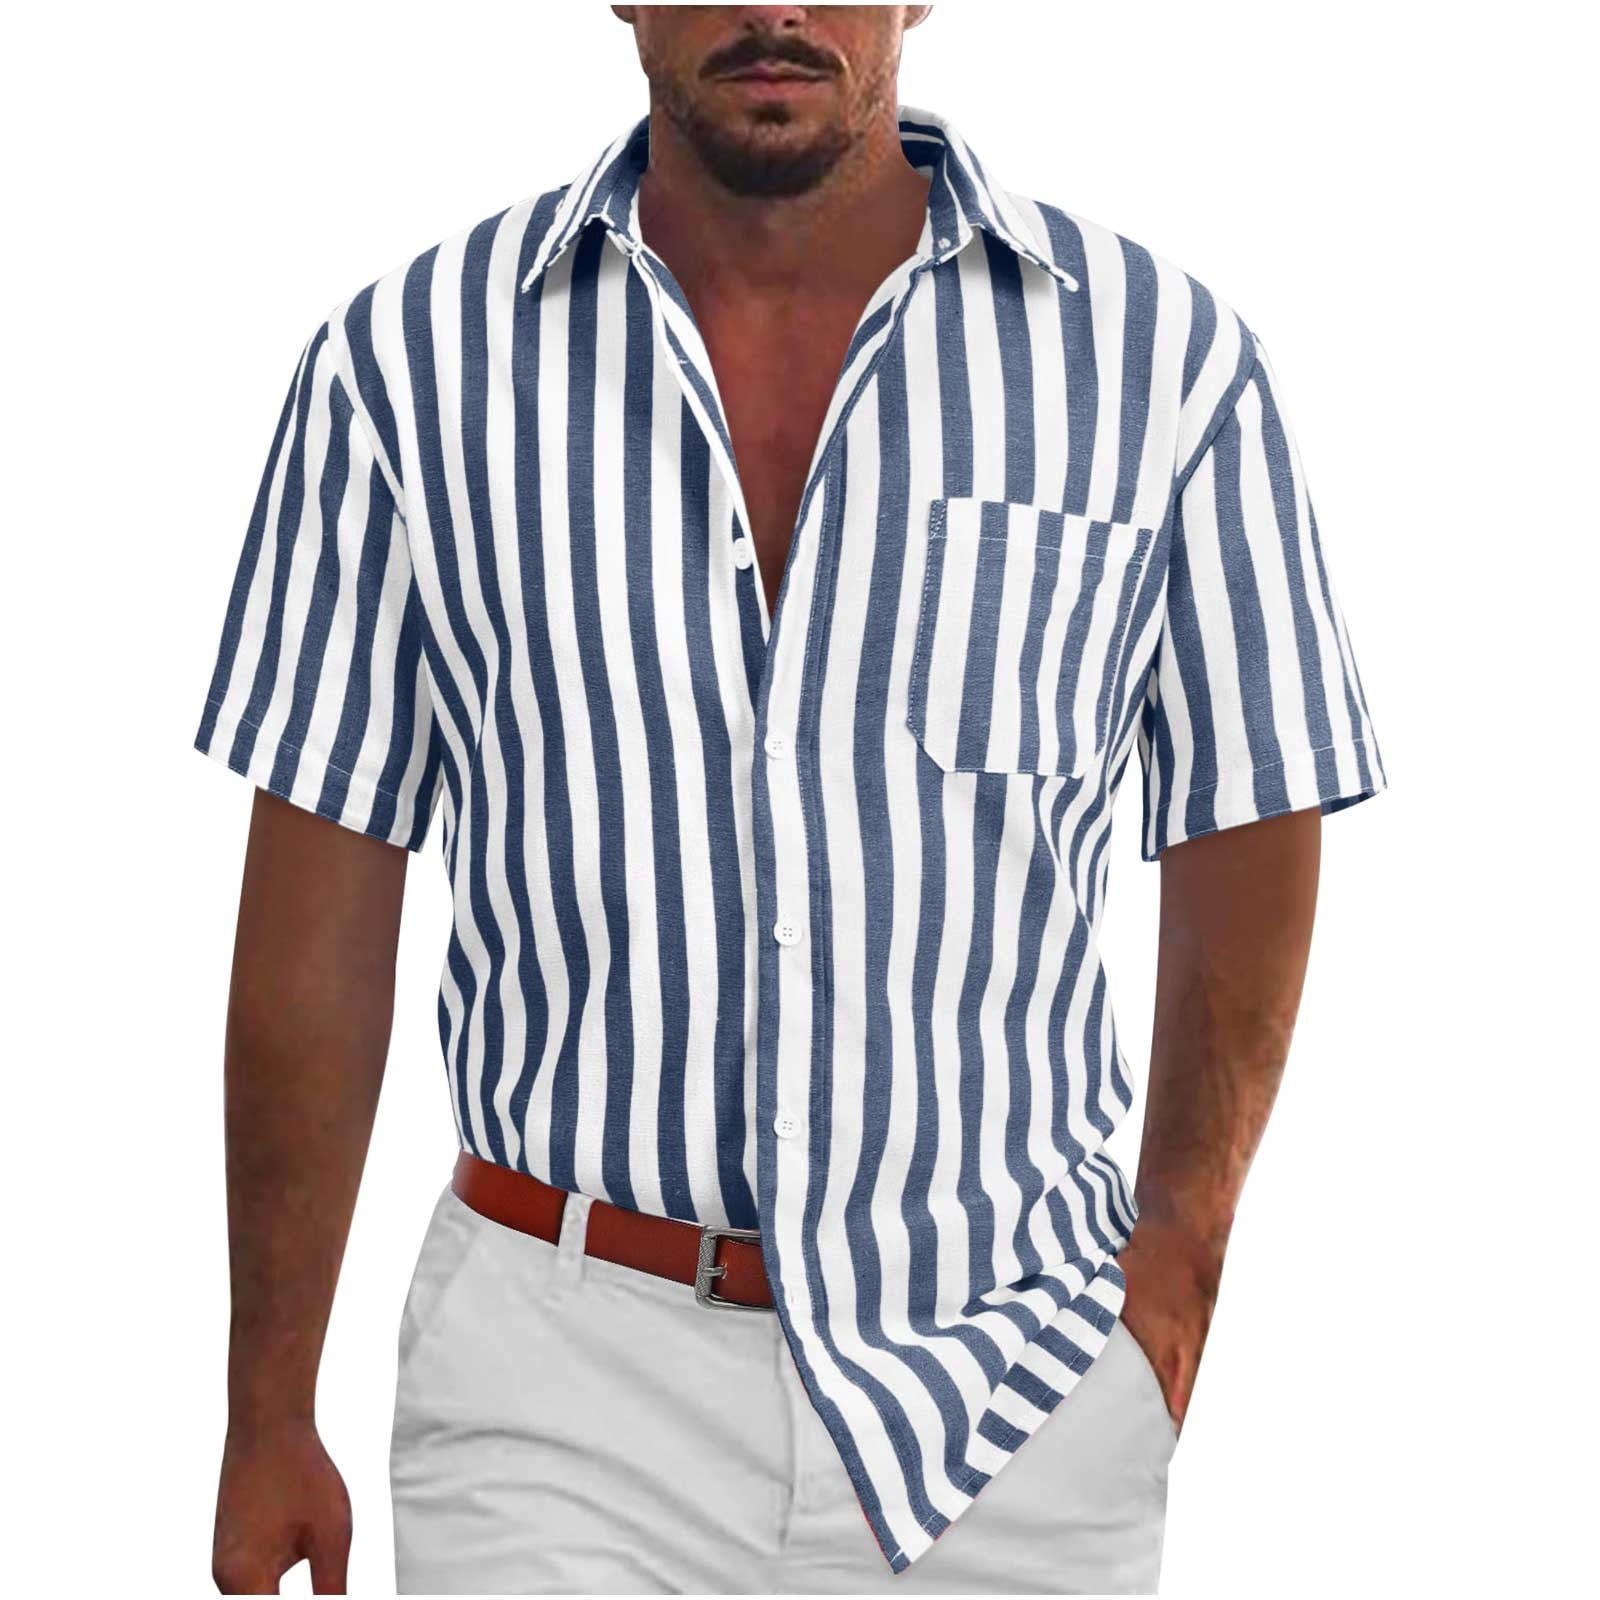 ZCFZJW Striped Button Down Shirts for Men Casual Summer Short Sleeve ...